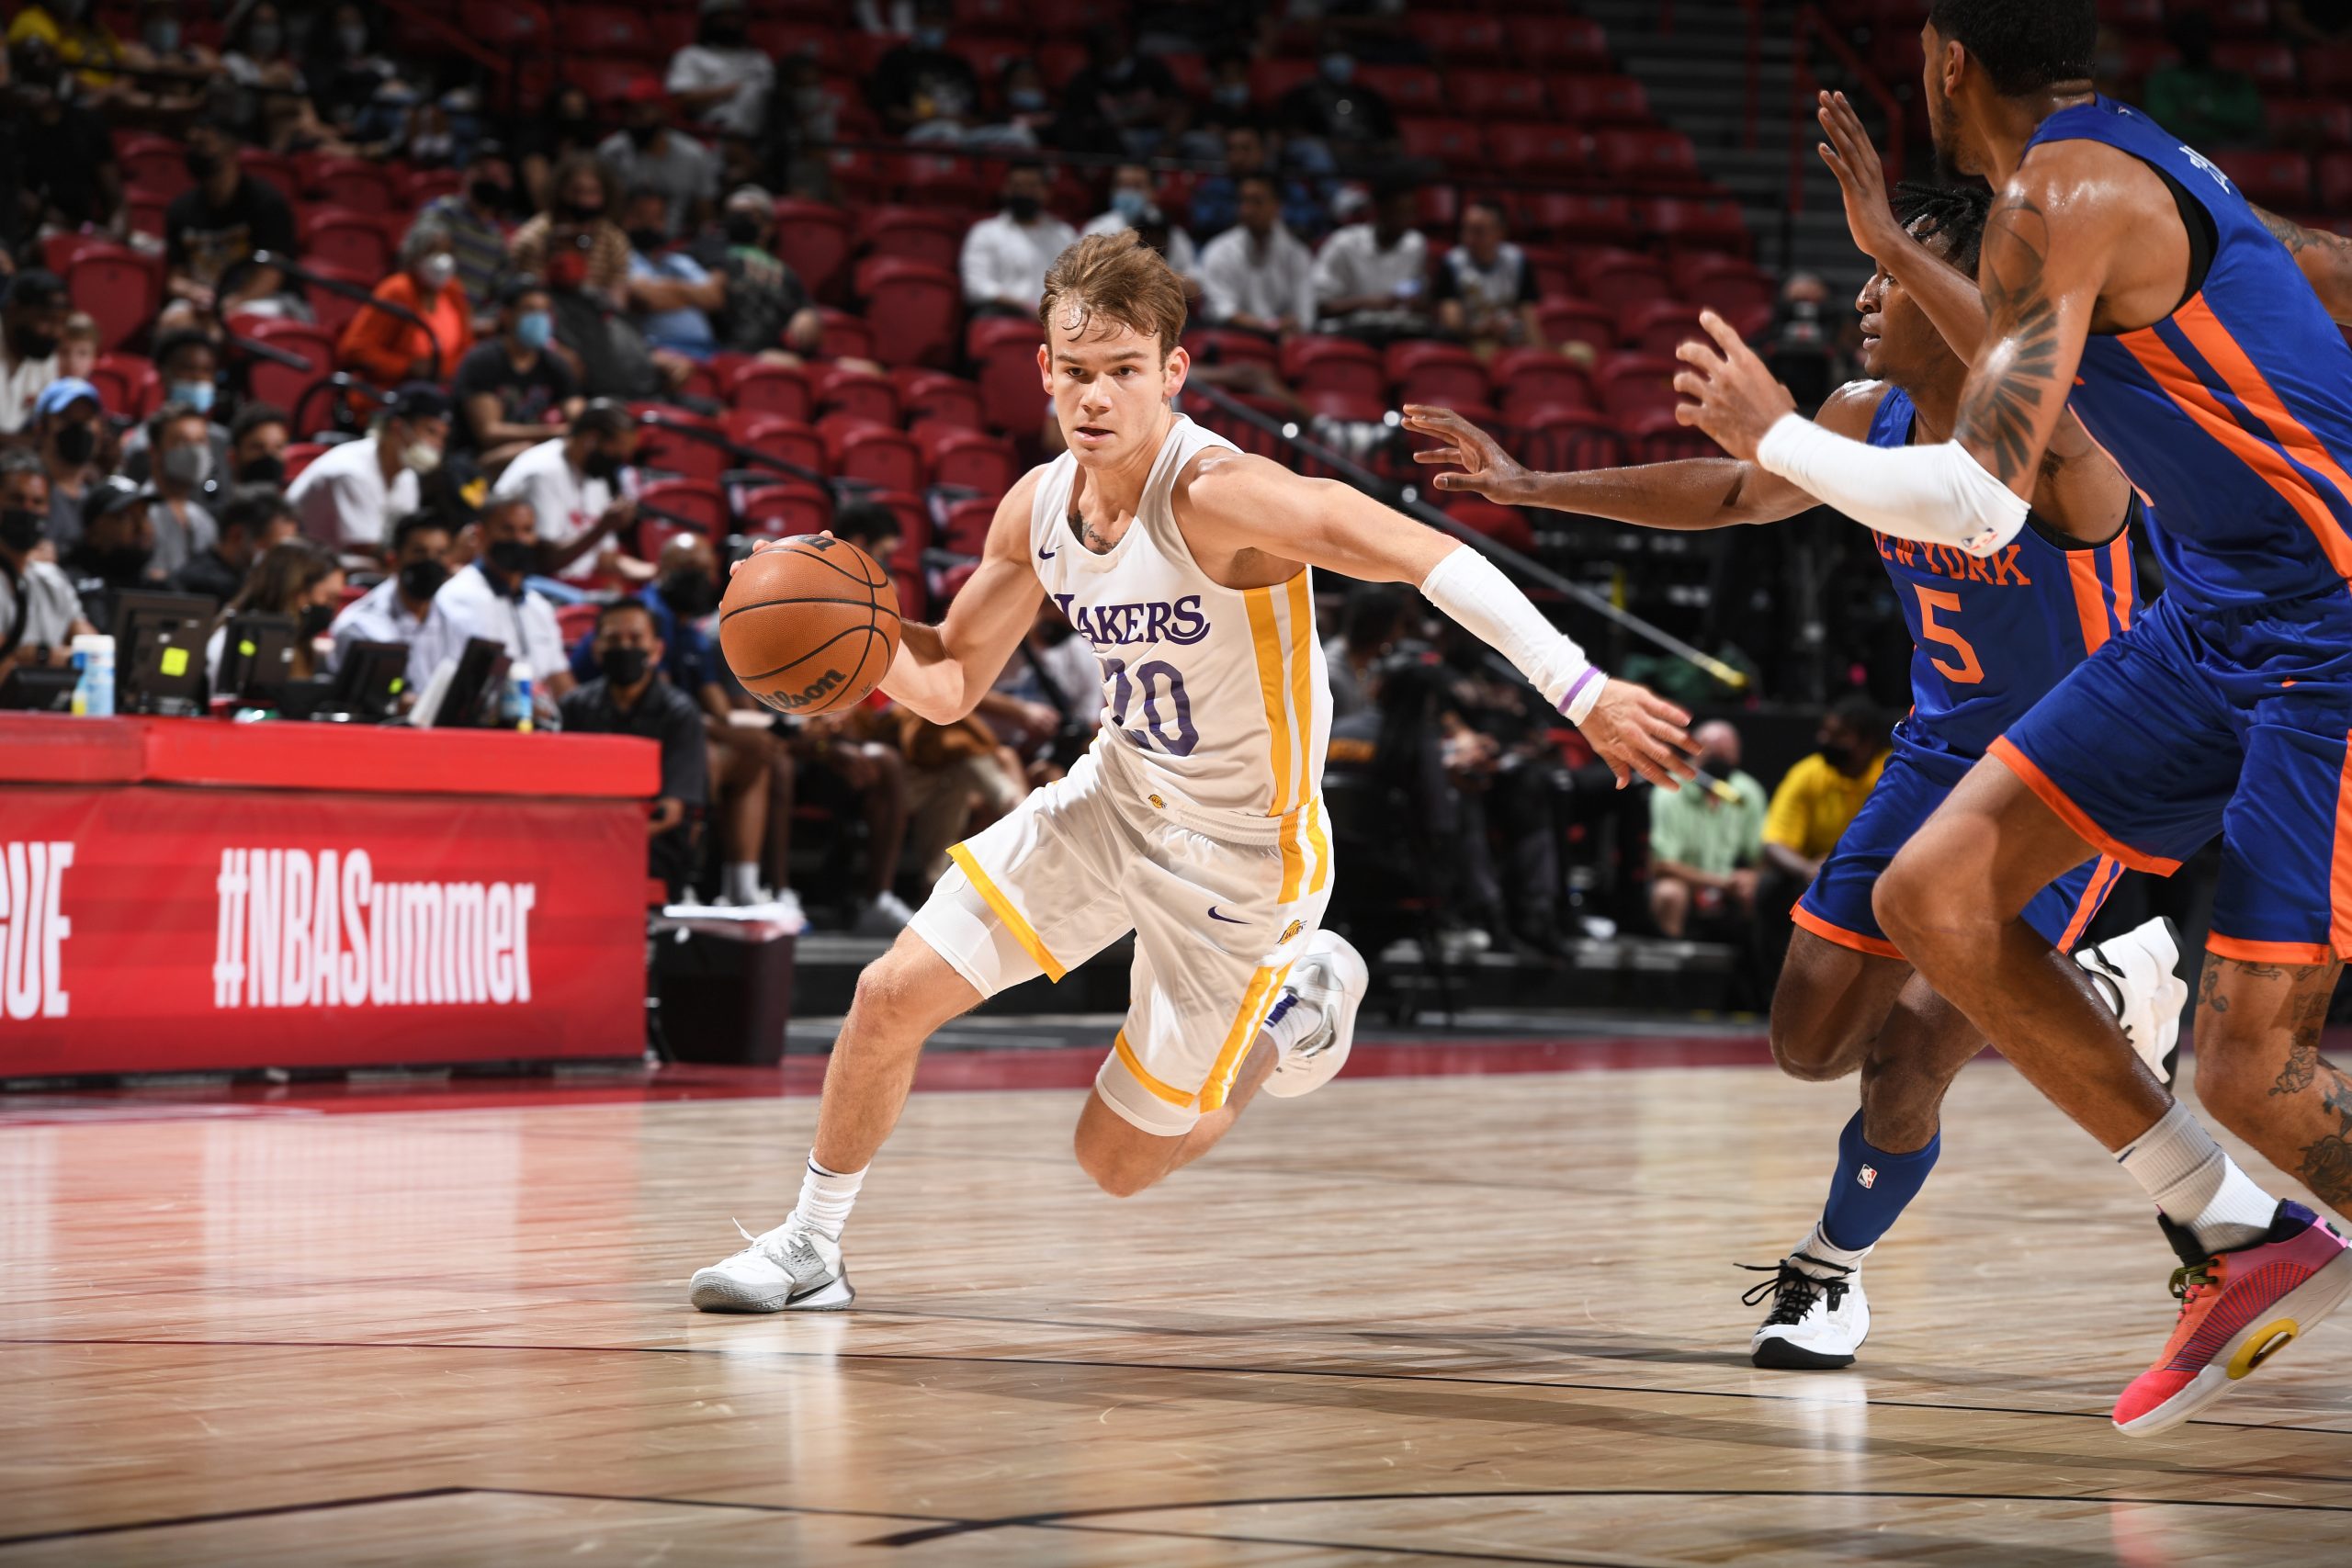 Mac McClung (Gate City) magnificent in debut for G League's South Bay Lakers